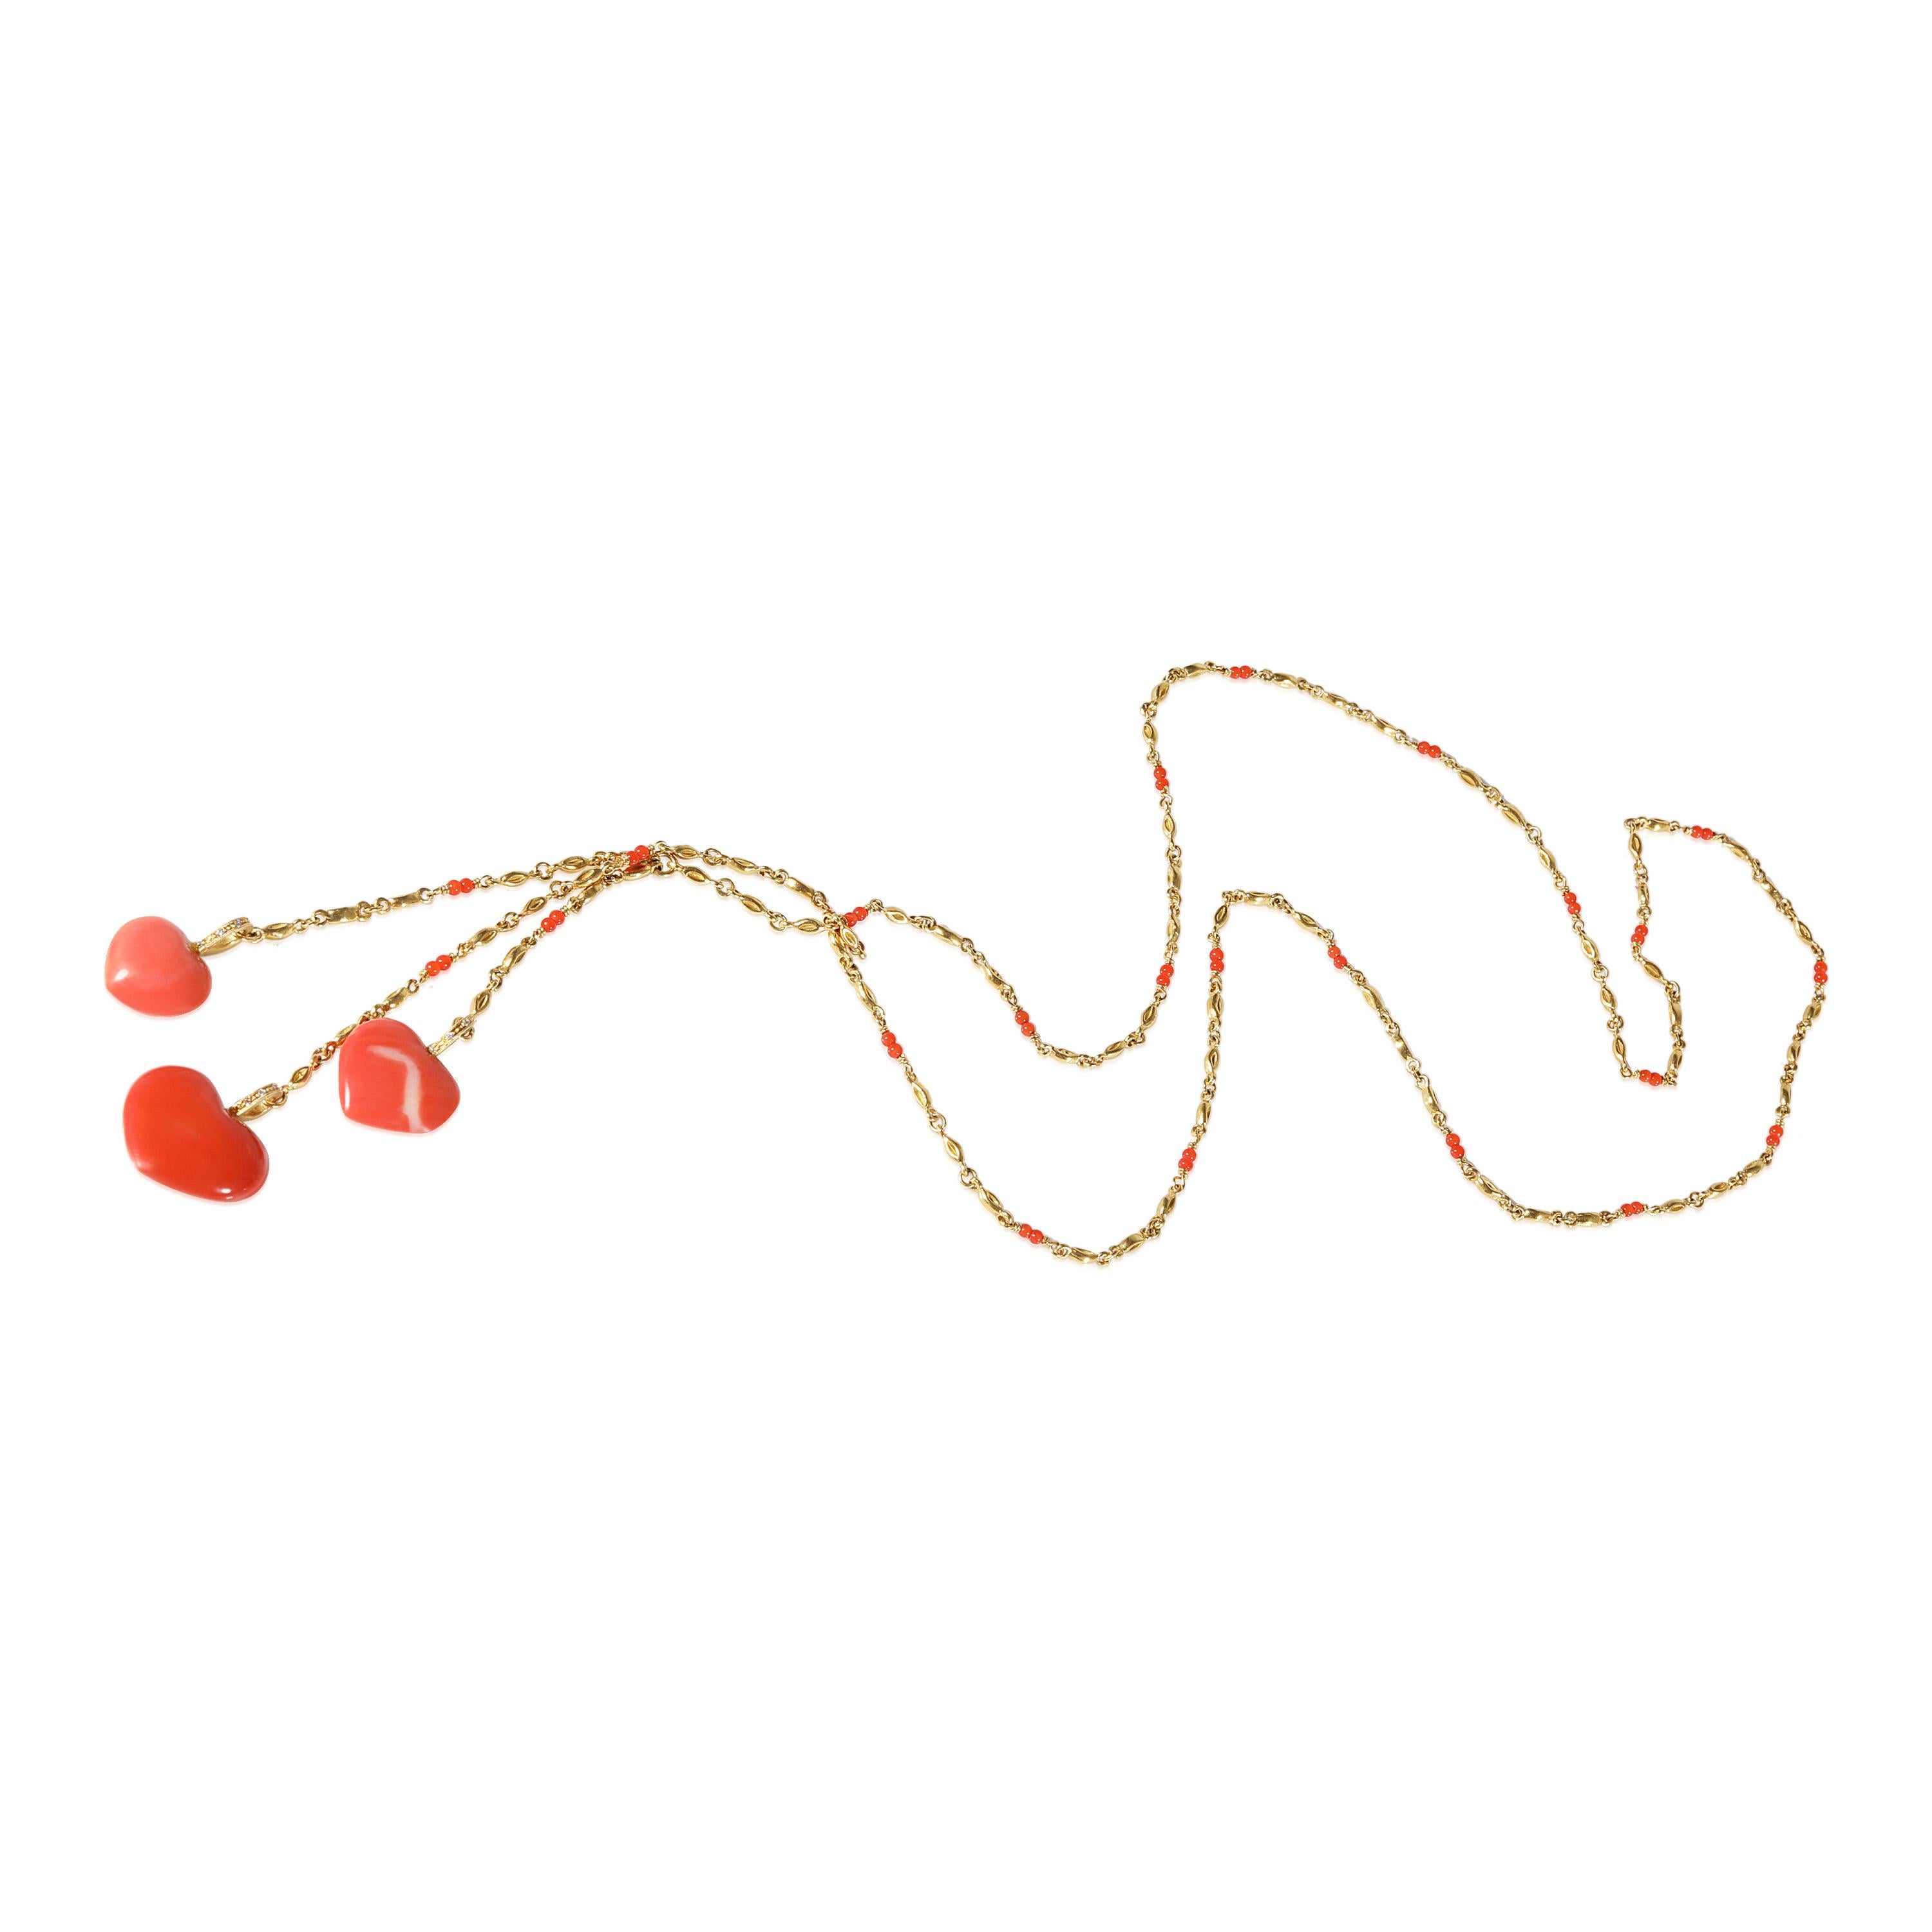 Coral Lariat Necklace With Hearts Necklace in 20k Yellow Gold

PRIMARY DETAILS
SKU: 122944
Listing Title: Coral Lariat Necklace With Hearts Necklace in 20k Yellow Gold
Condition Description: Retails for 4995 USD. In excellent condition. Chain is 34